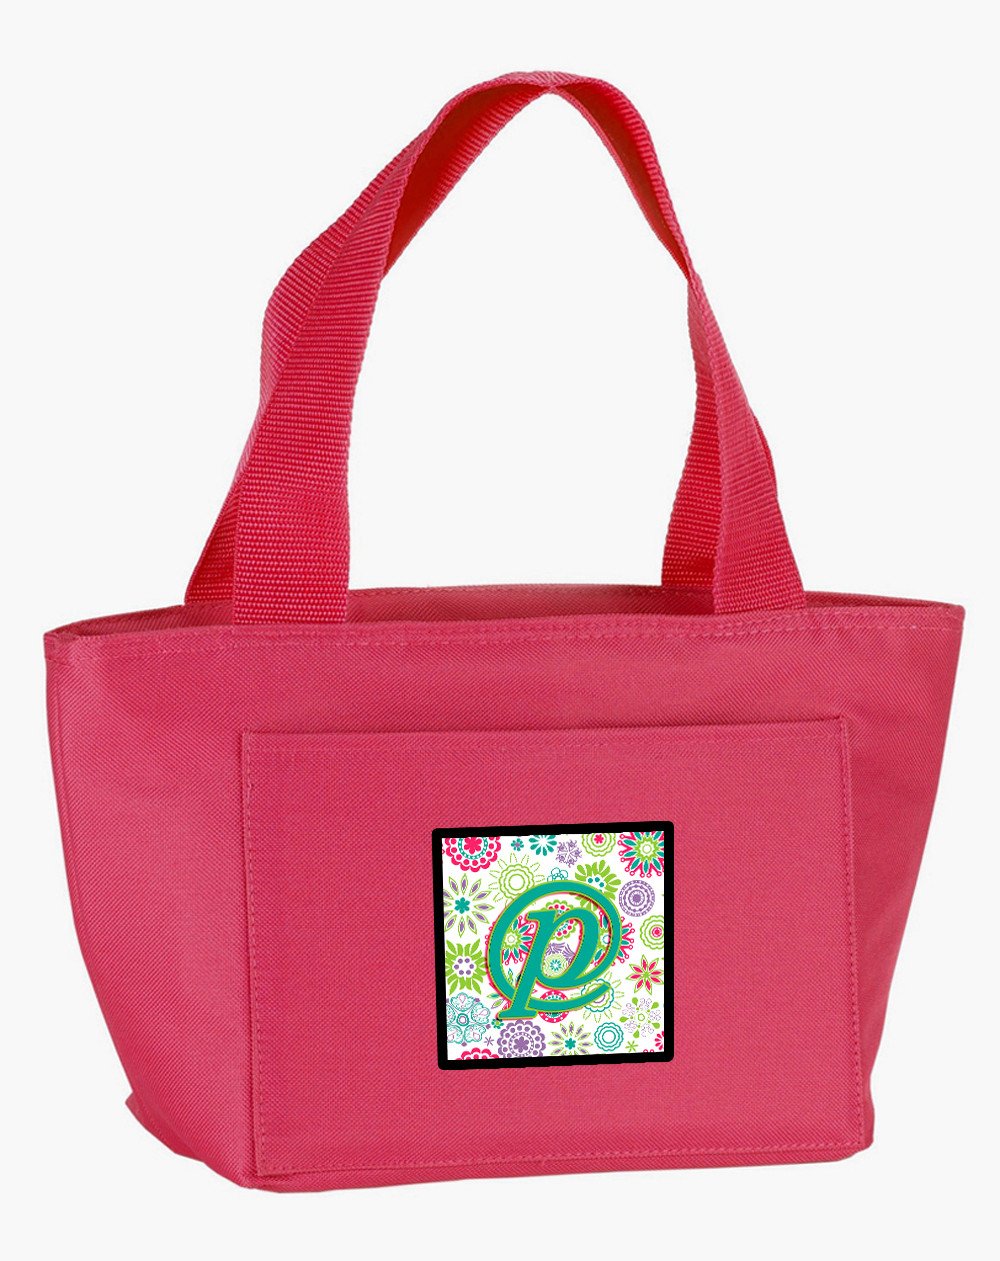 Letter P Flowers Pink Teal Green Initial Lunch Bag CJ2011-PPK-8808 by Caroline's Treasures